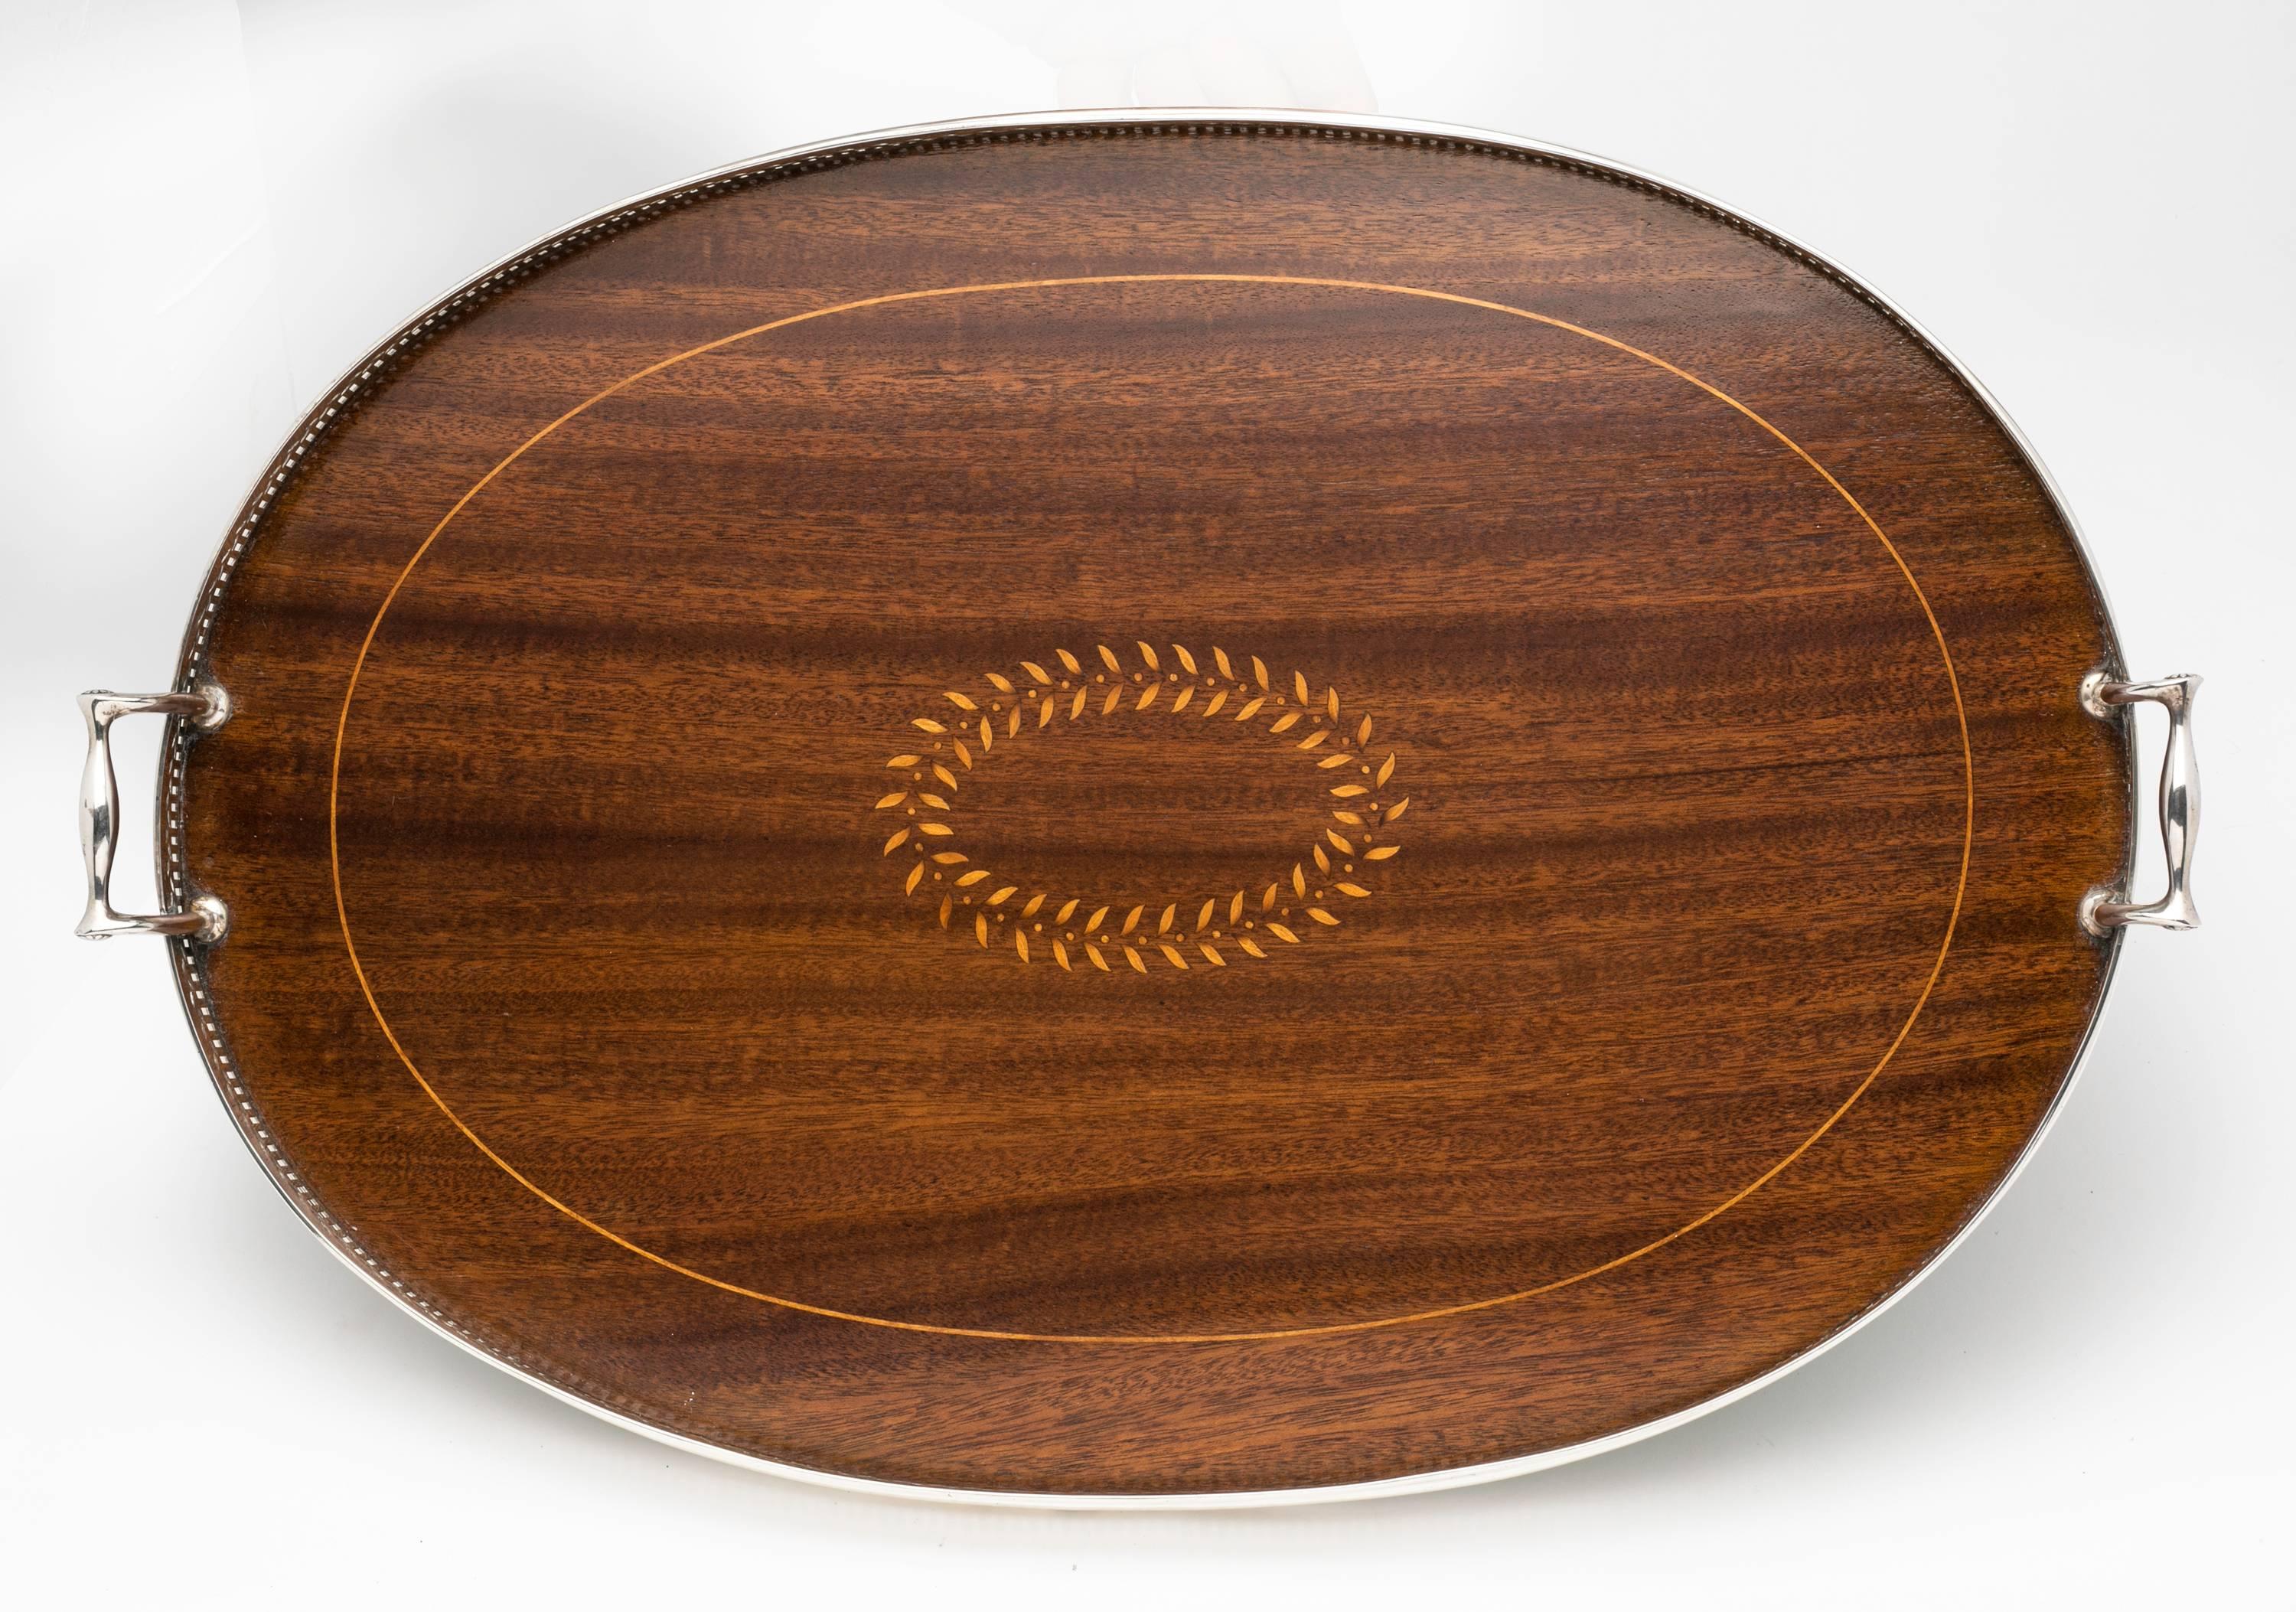 From 1920s, large oval Sterling silver tray with handles by Tiffany & Co. Mahogany wood with Satin wood inlaid marquetry in leaf design. Beval glass liner to protect the wood. Wonderful gallery tray server. (There is a small chipping at the edge of